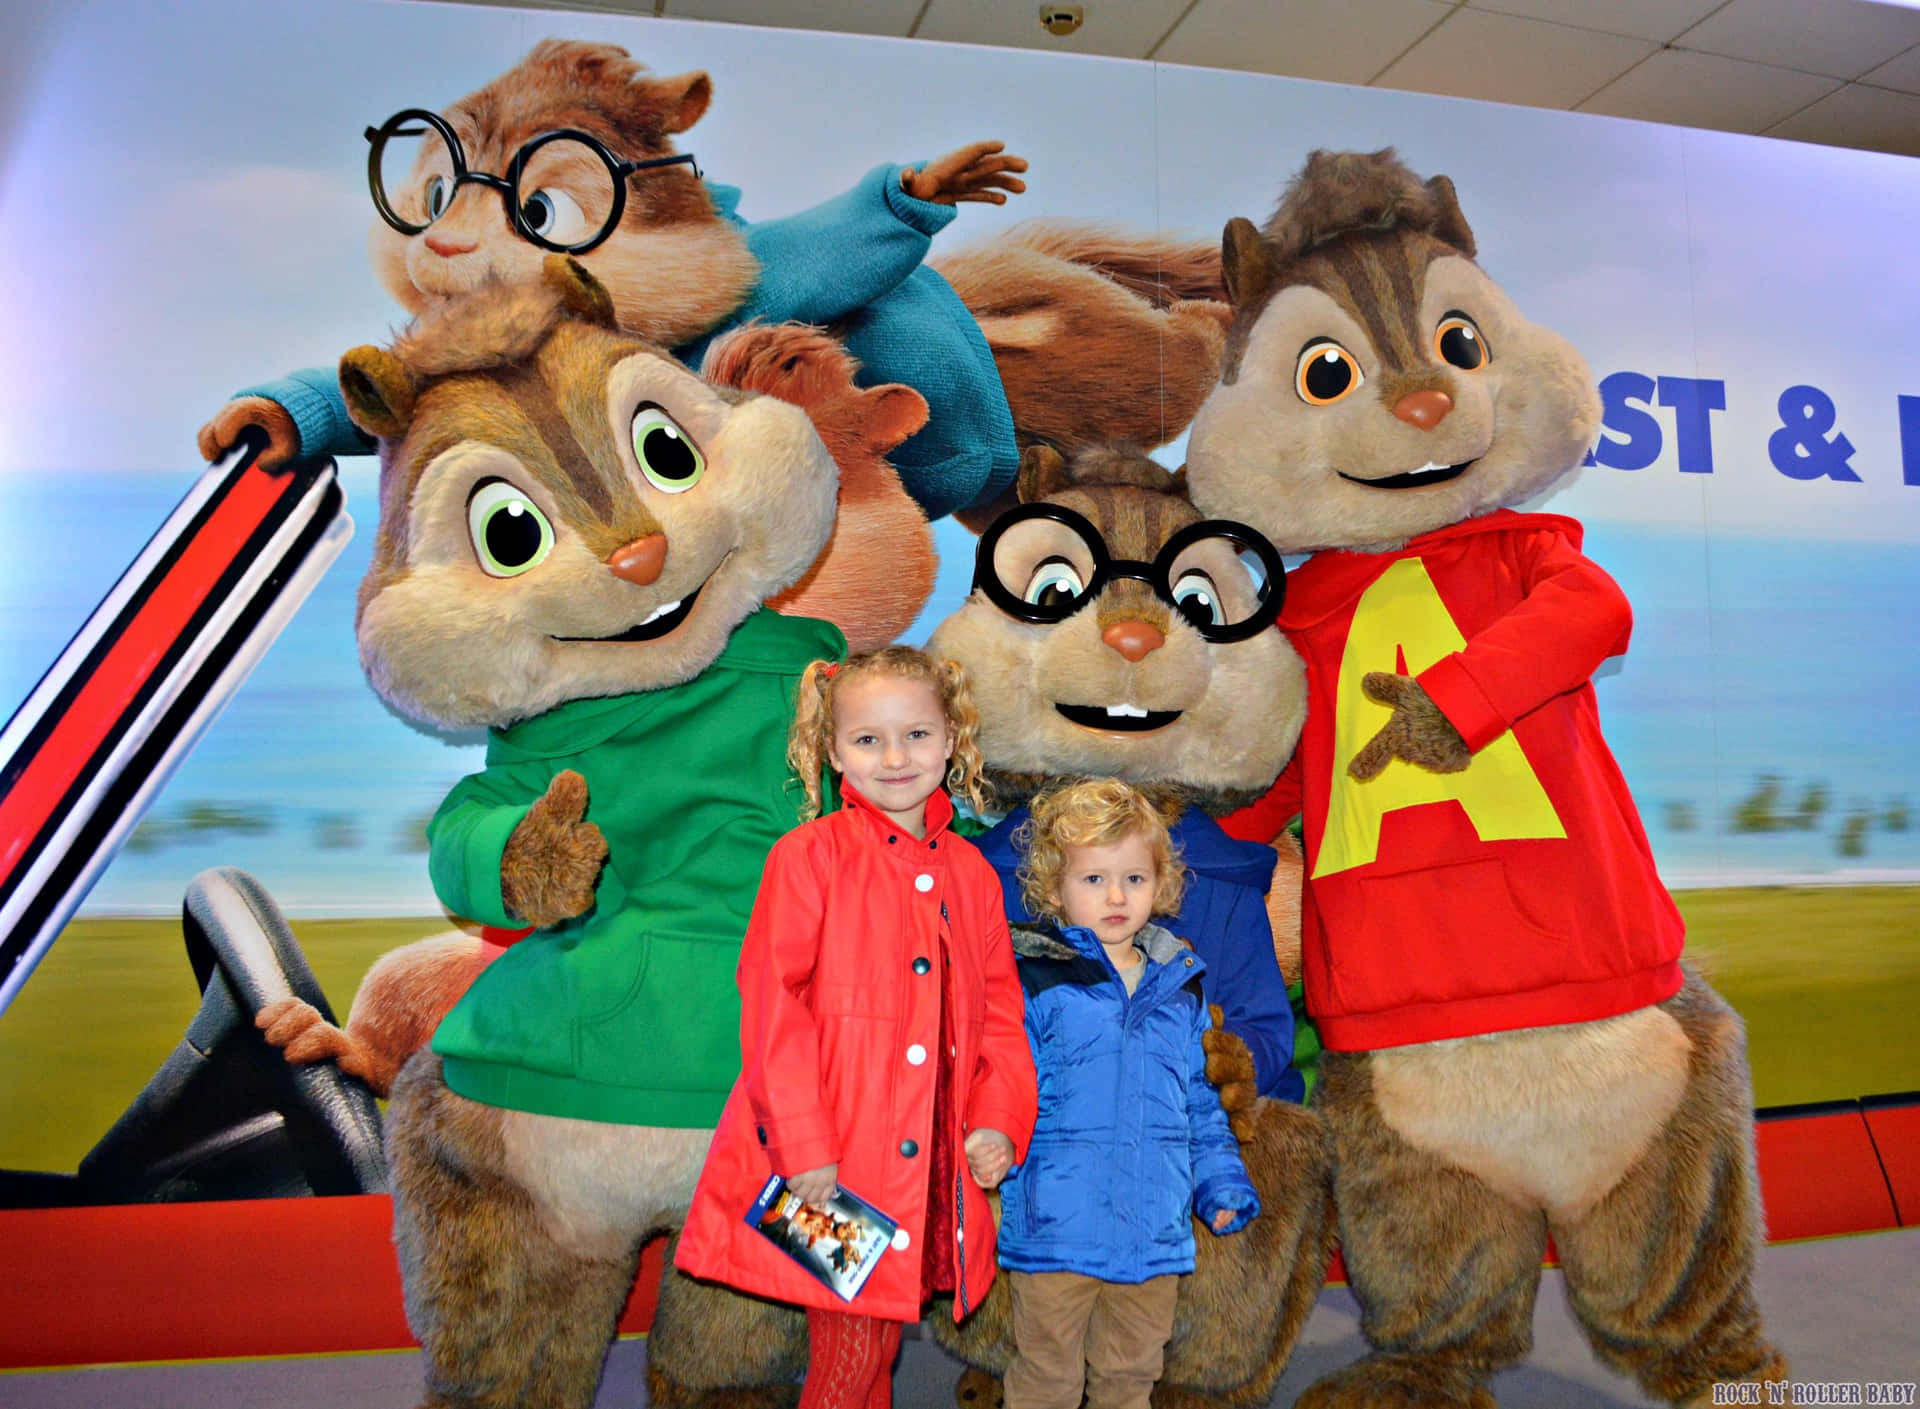 Get ready for some music and misadventures with Alvin and The Chipmunks!